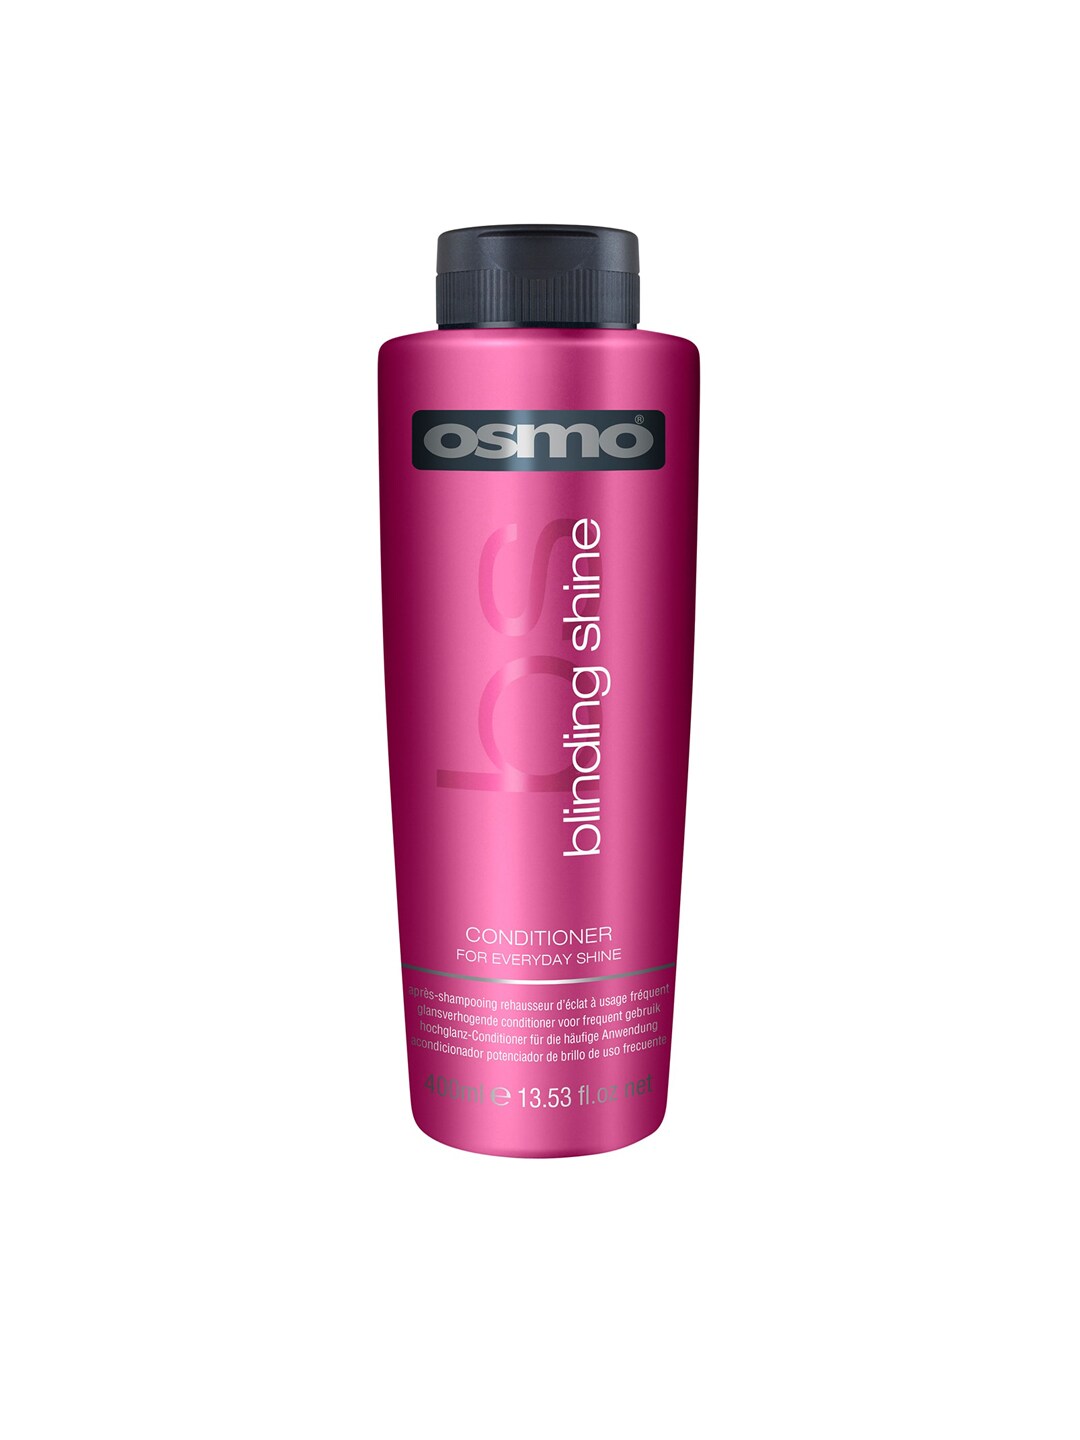 osmo Blinding Shine Conditioner with Rosemary & Cedarwood 400 ml Price in India